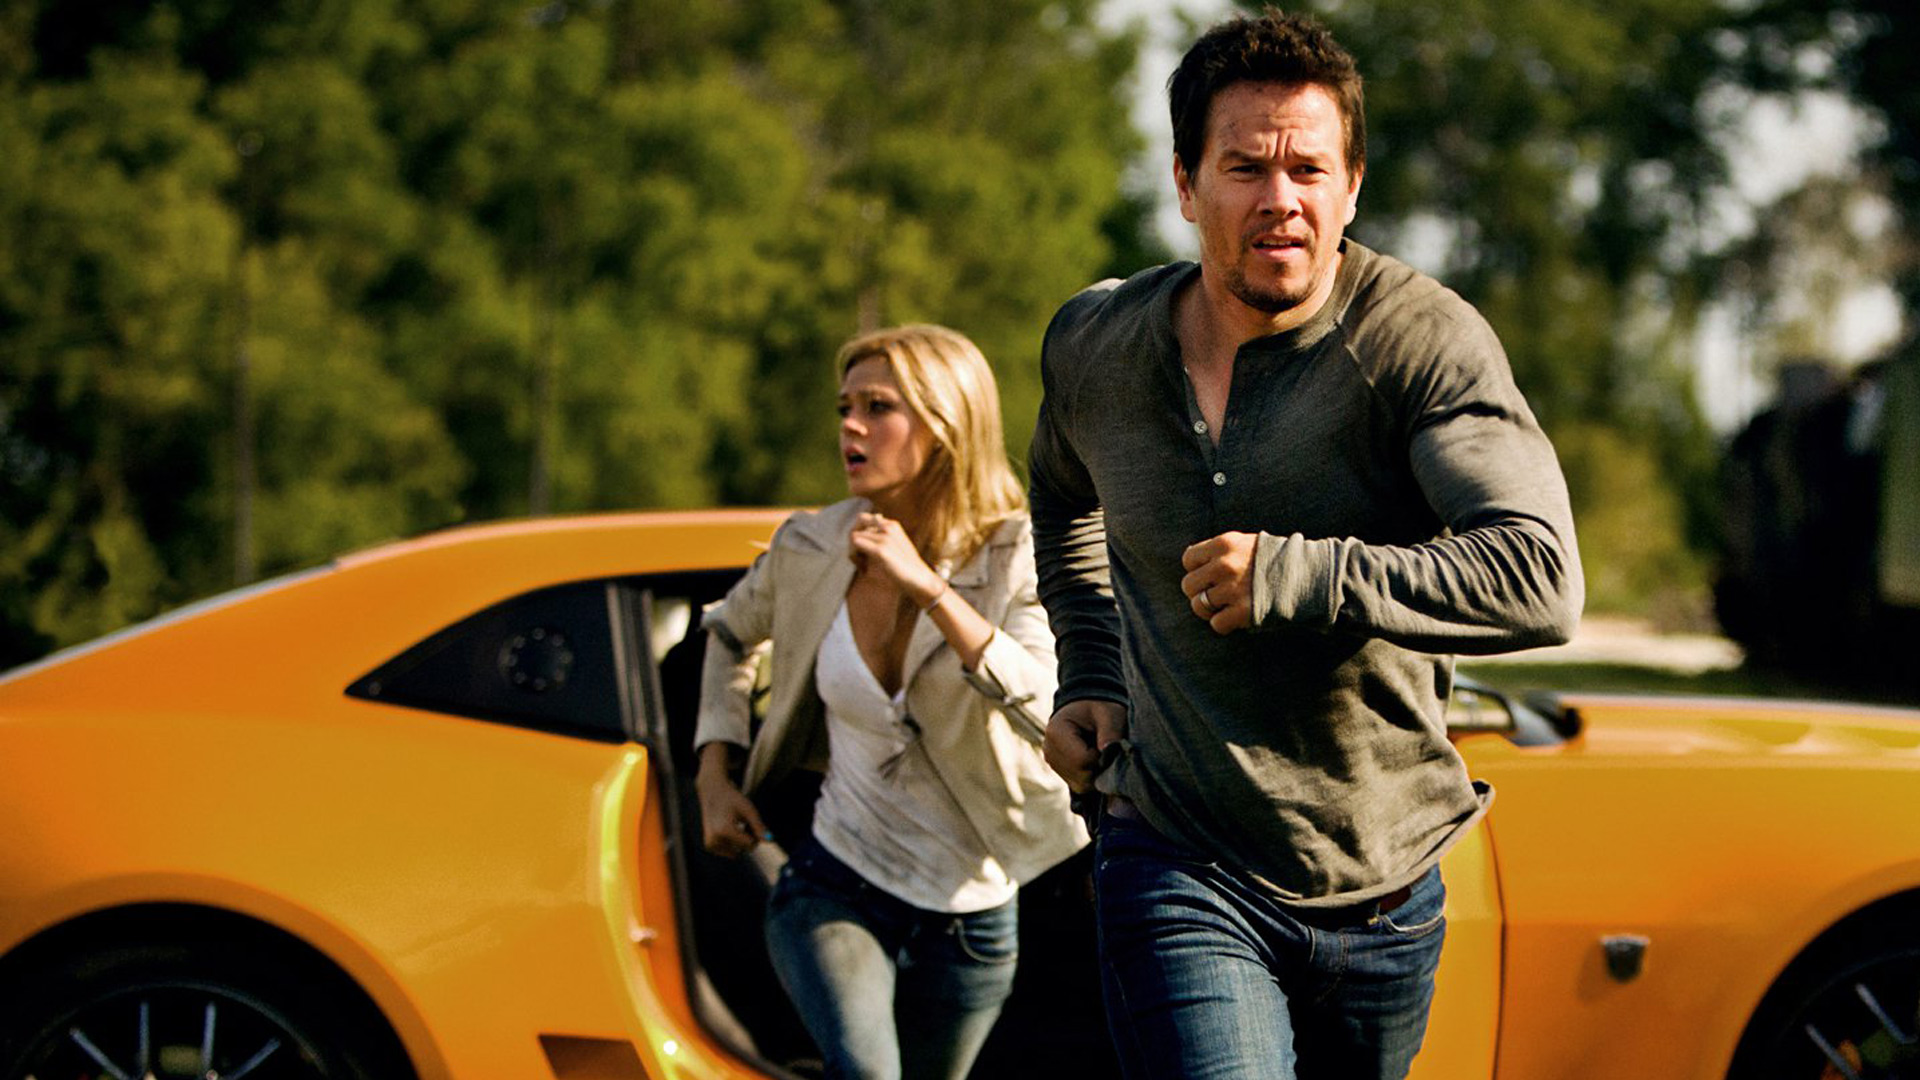 Mark Wahlberg's Transformers films were huge box office hits